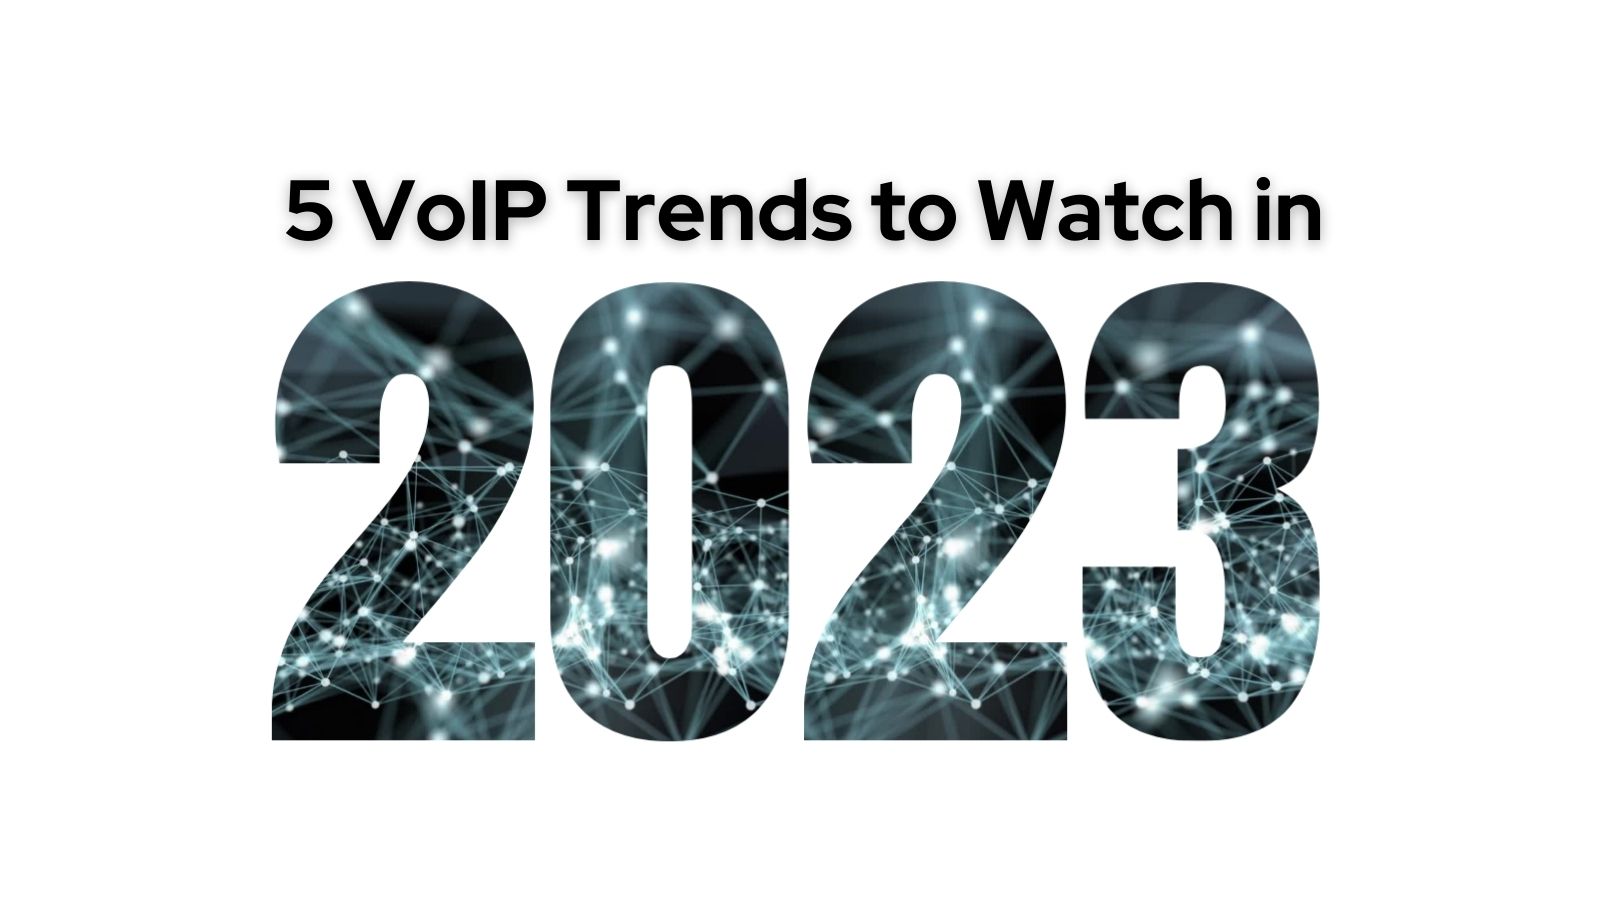 5 VoIP Trends to Watch in 2023